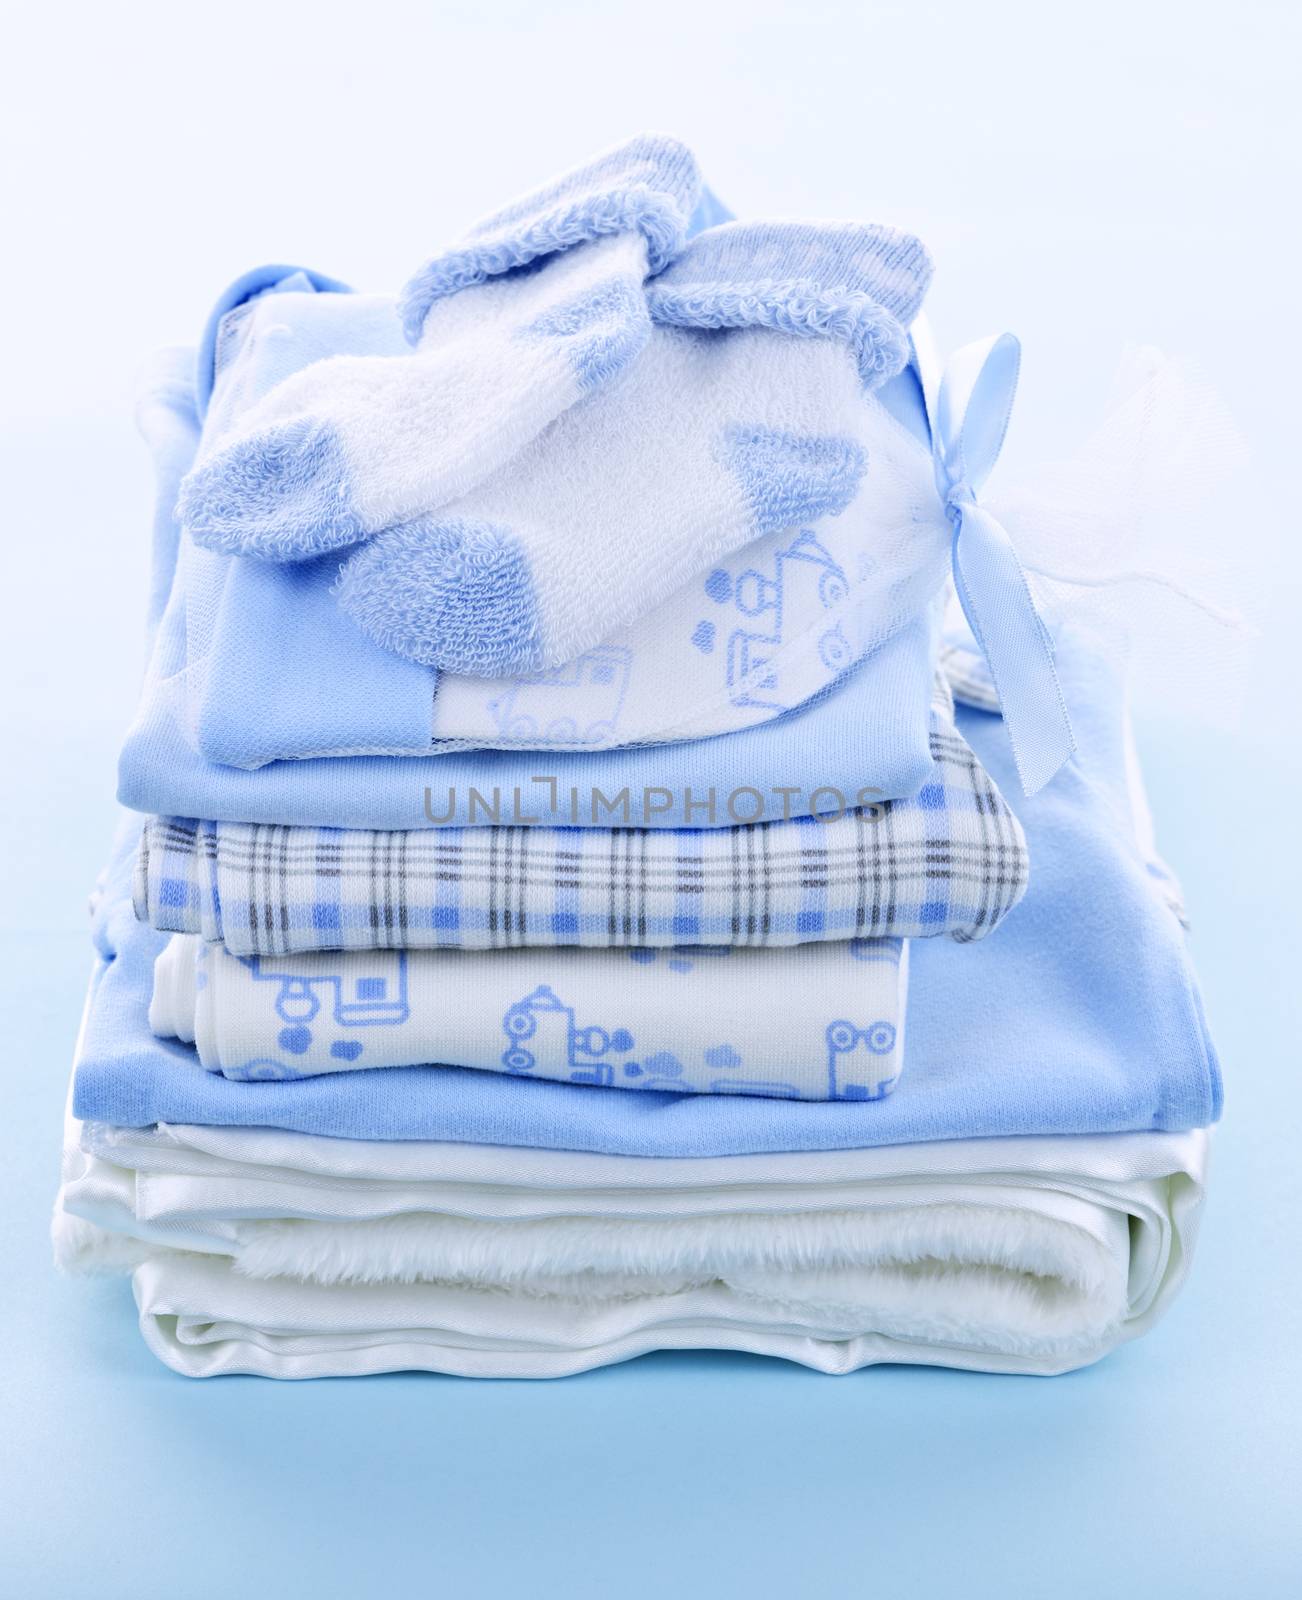 Stack of boy infant clothing for baby shower on blue background